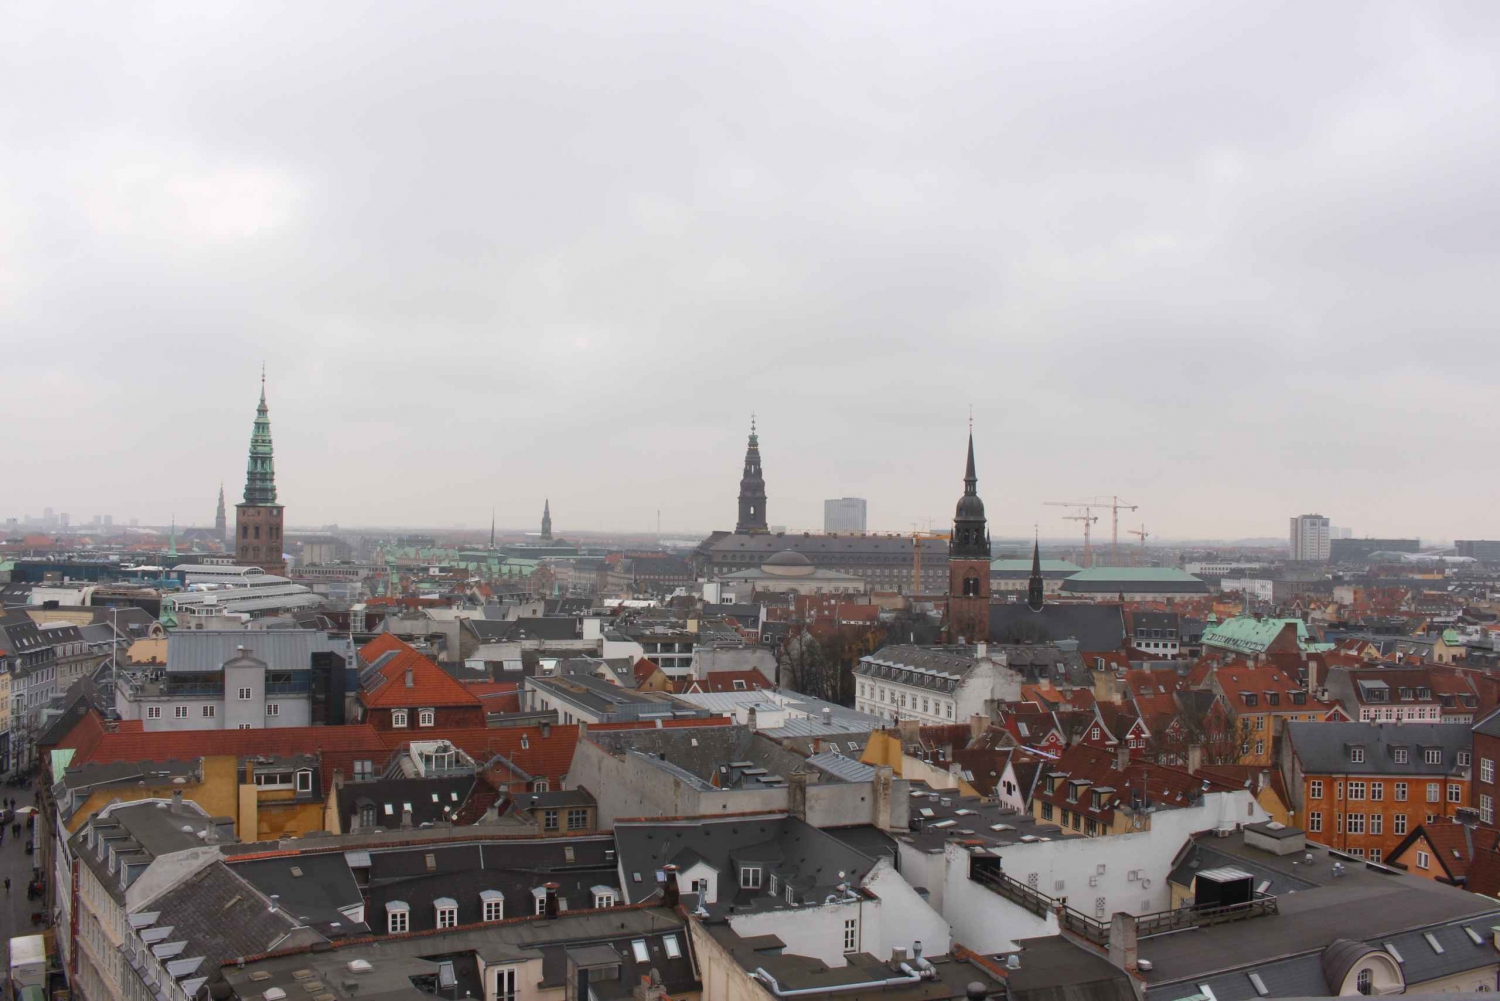 Copenhagen Welcome Tour: Private Tour with a Local